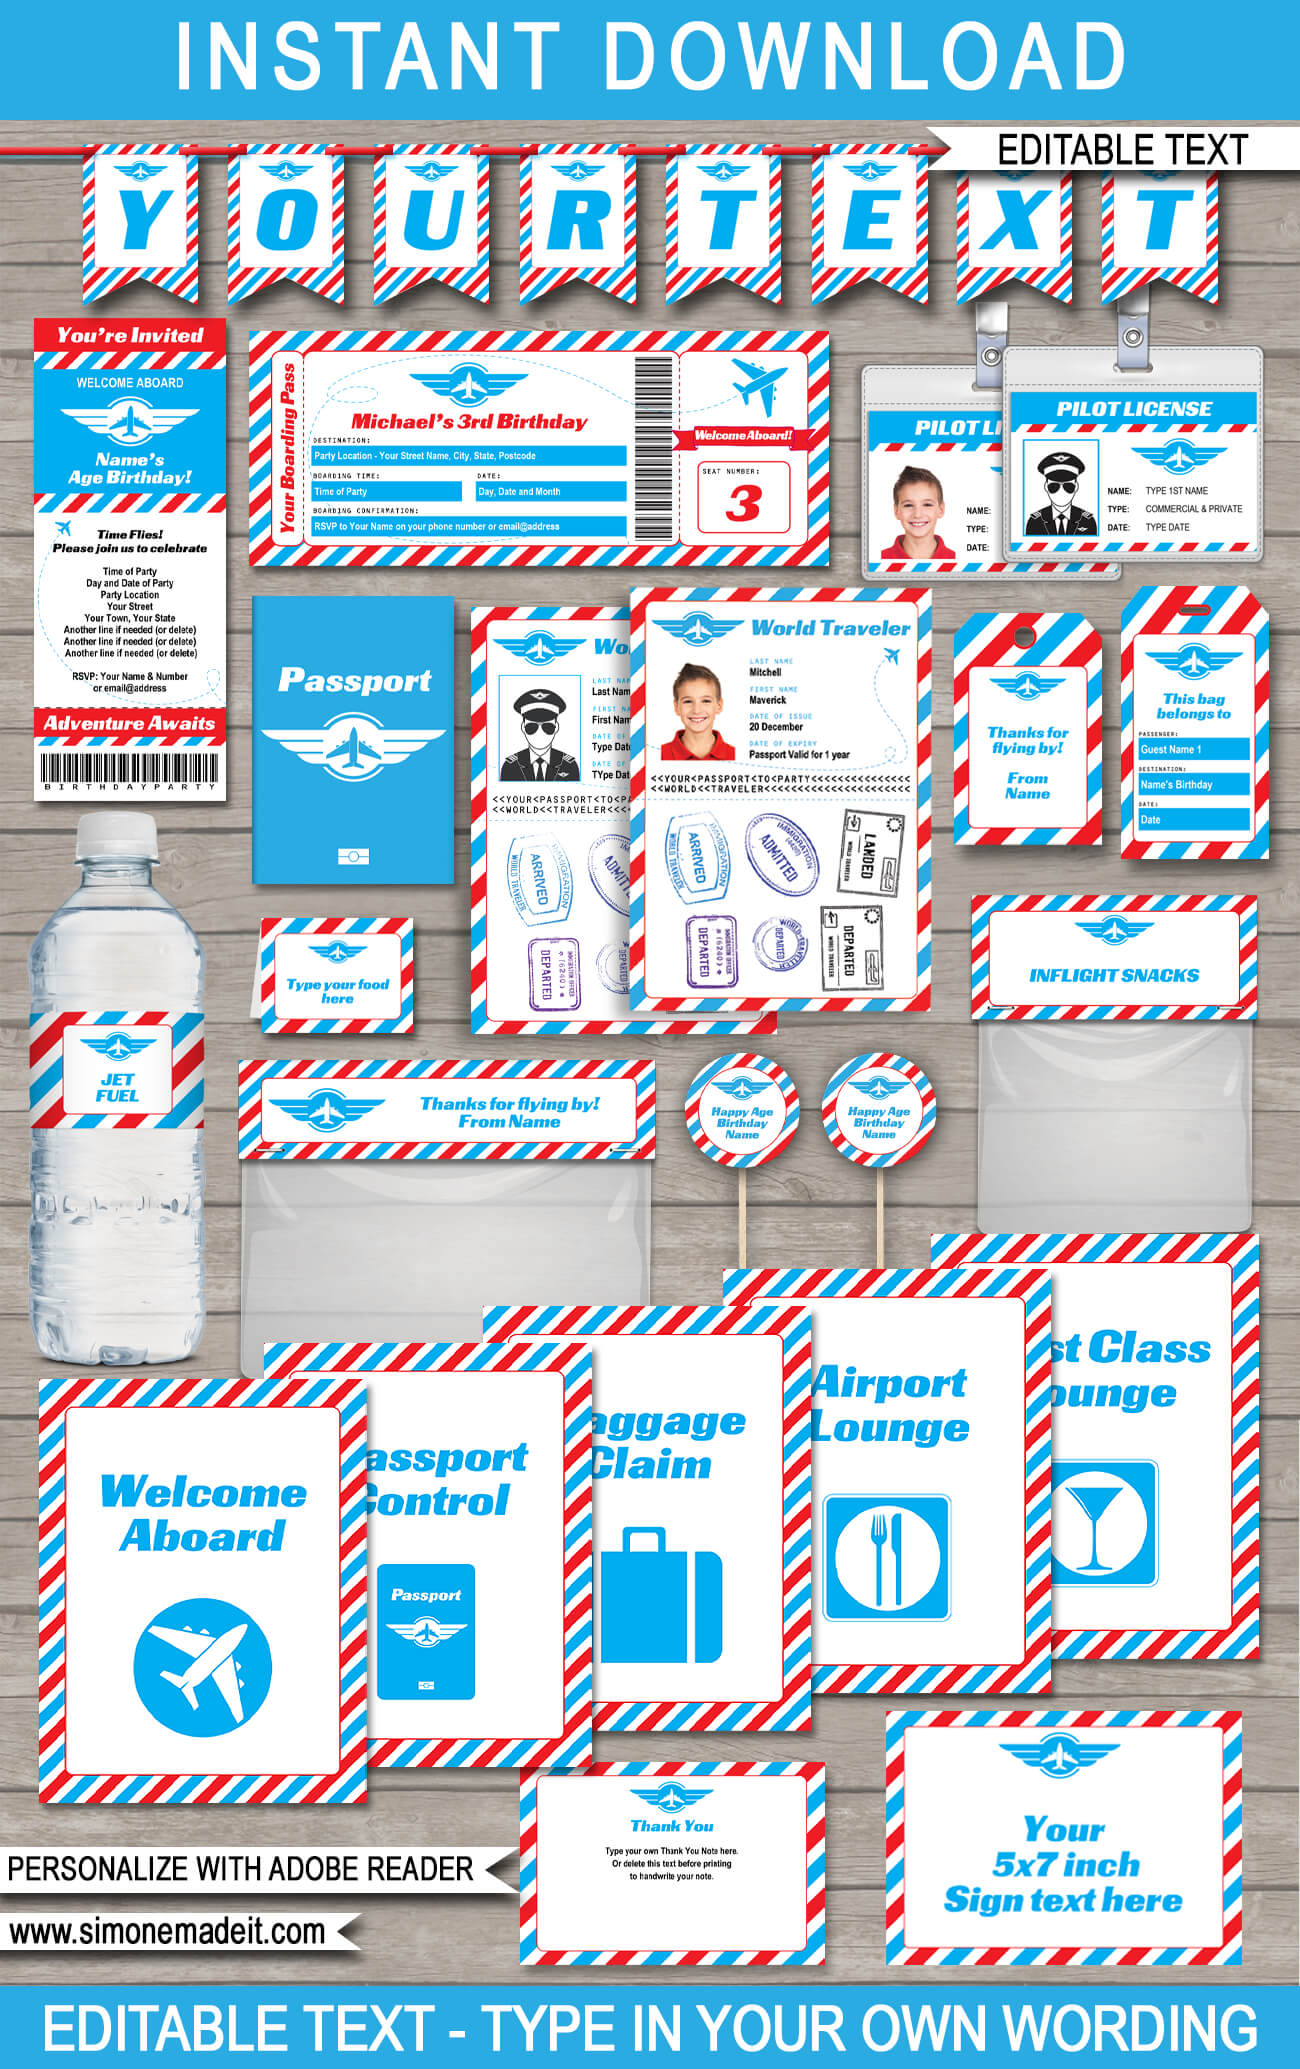 Airplane Party Printables, Invitations, Decorations Templates | Passports | Pilot Licenses Luggage Tags | Passport | Boarding Pass | Airport Signs | Plane Theme Birthday Party | Editable DIY Theme Templates | INSTANT DOWNLOADS $12.50 via SIMONEmadeit.com